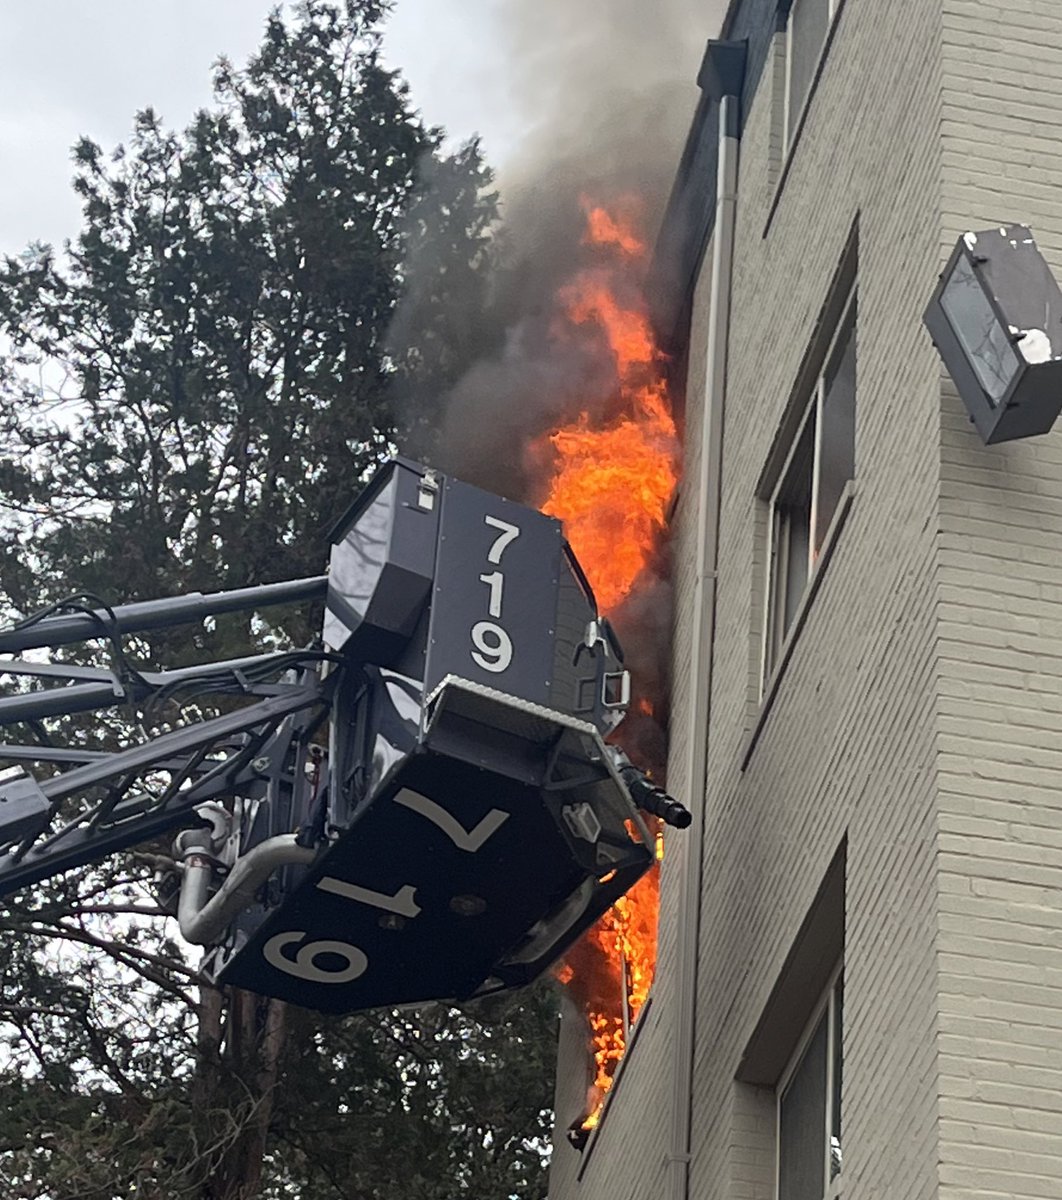 1701 East West Hwy; Origin/Cause, in 3rd floor bedroom, cell phone charger overheated nearby combustibles; 4 families displaced; 1 person evaluated (no EMS transport); Damage estimated